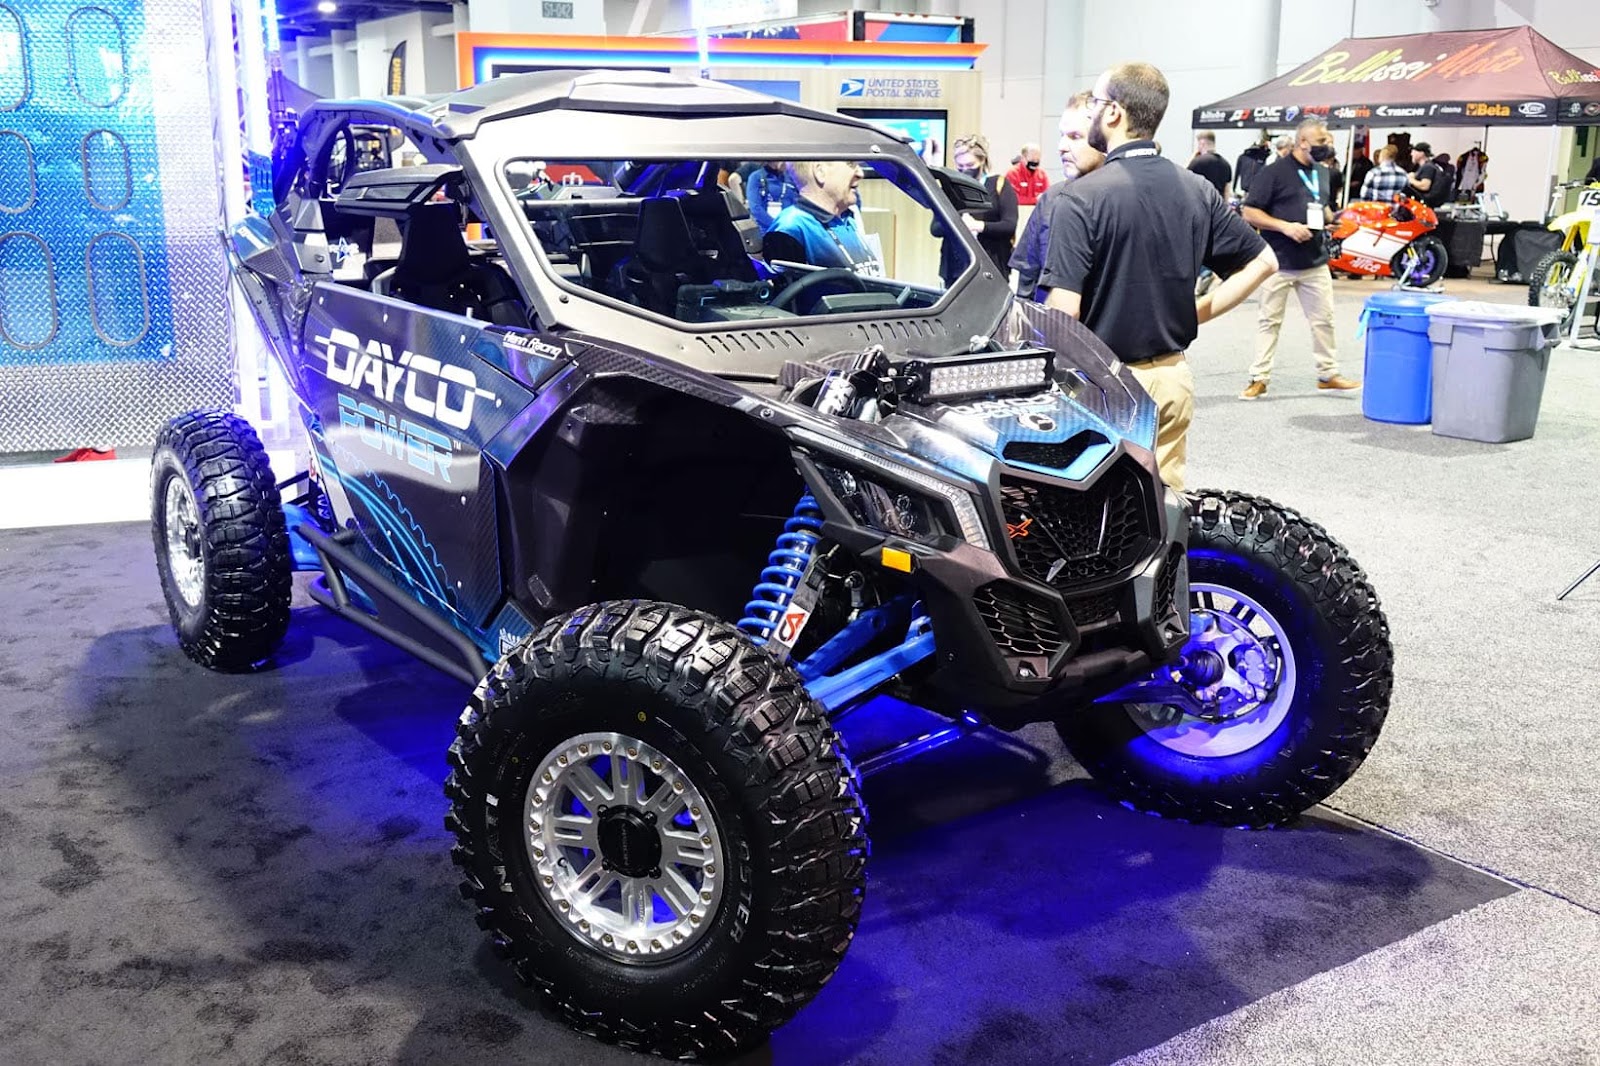 Custom side-by-side with neon underglow lighting showcased at AIMExpo trade show